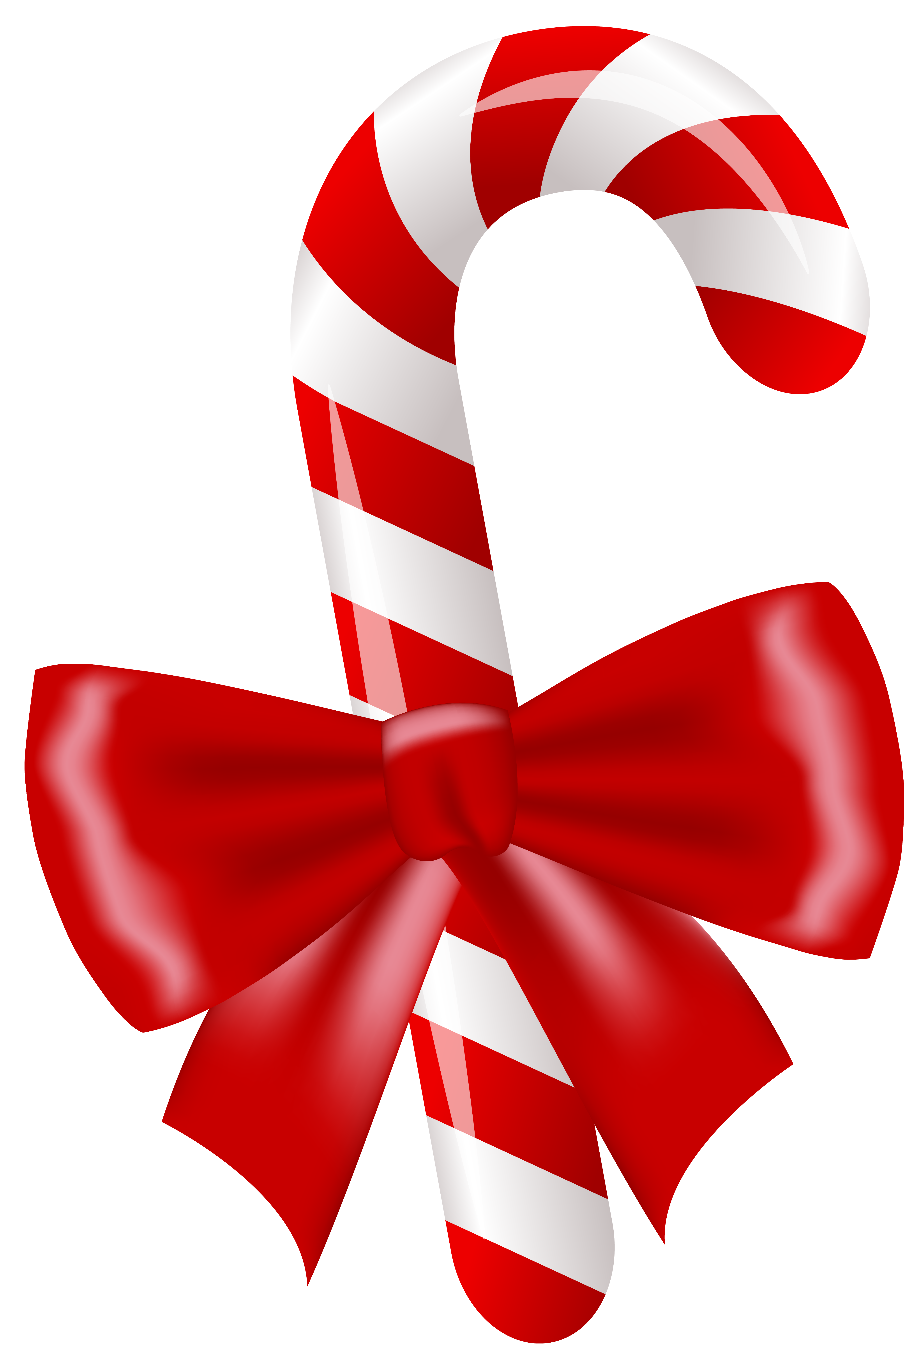 candy cane clipart high resolution